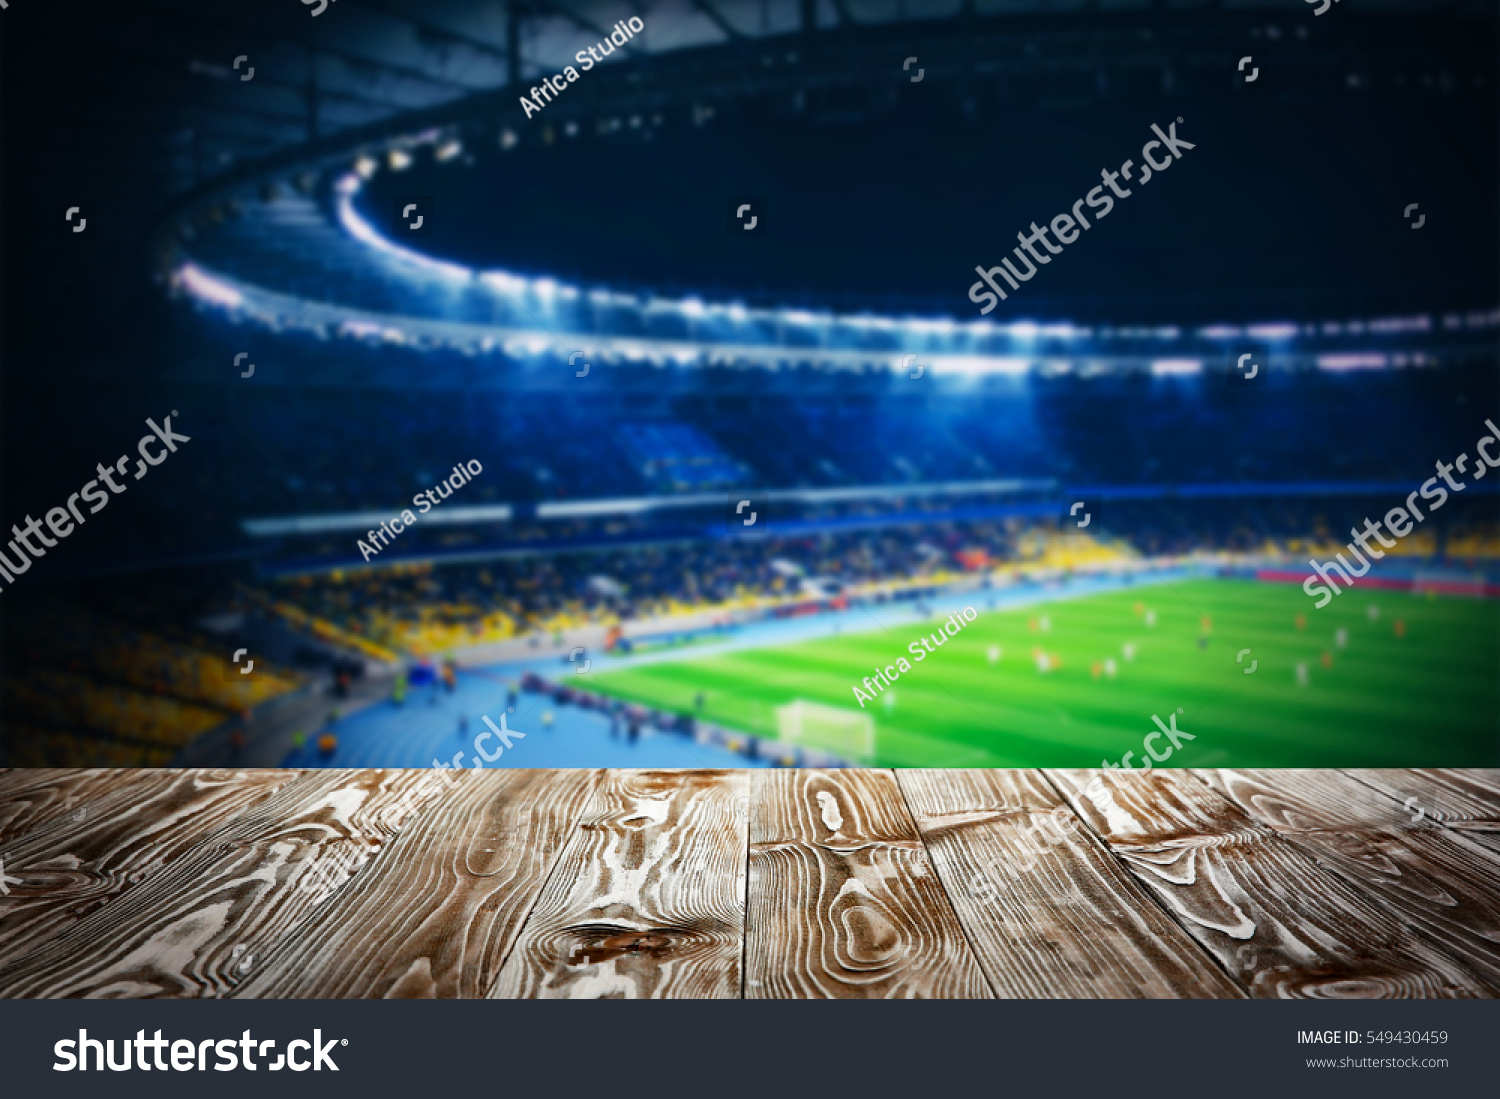 Wooden table against football stadium background #549430459